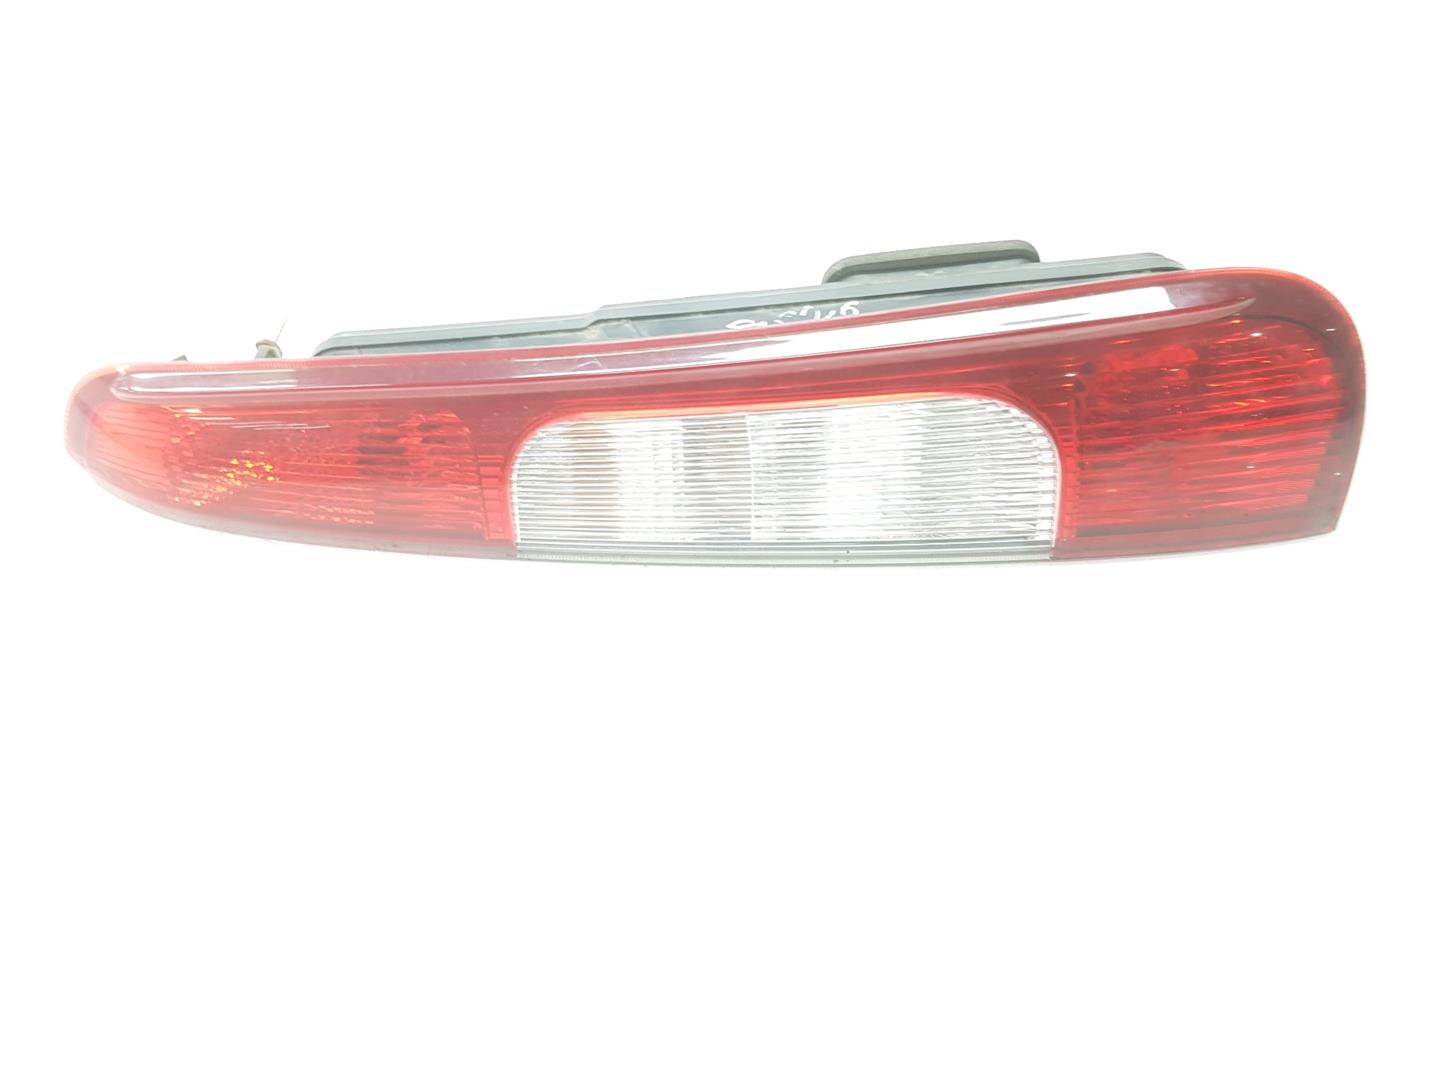 VAUXHALL C-Max 1 generation (2003-2010) Rear Right Taillight Lamp 1347454, 3M5113A602AD 19916821